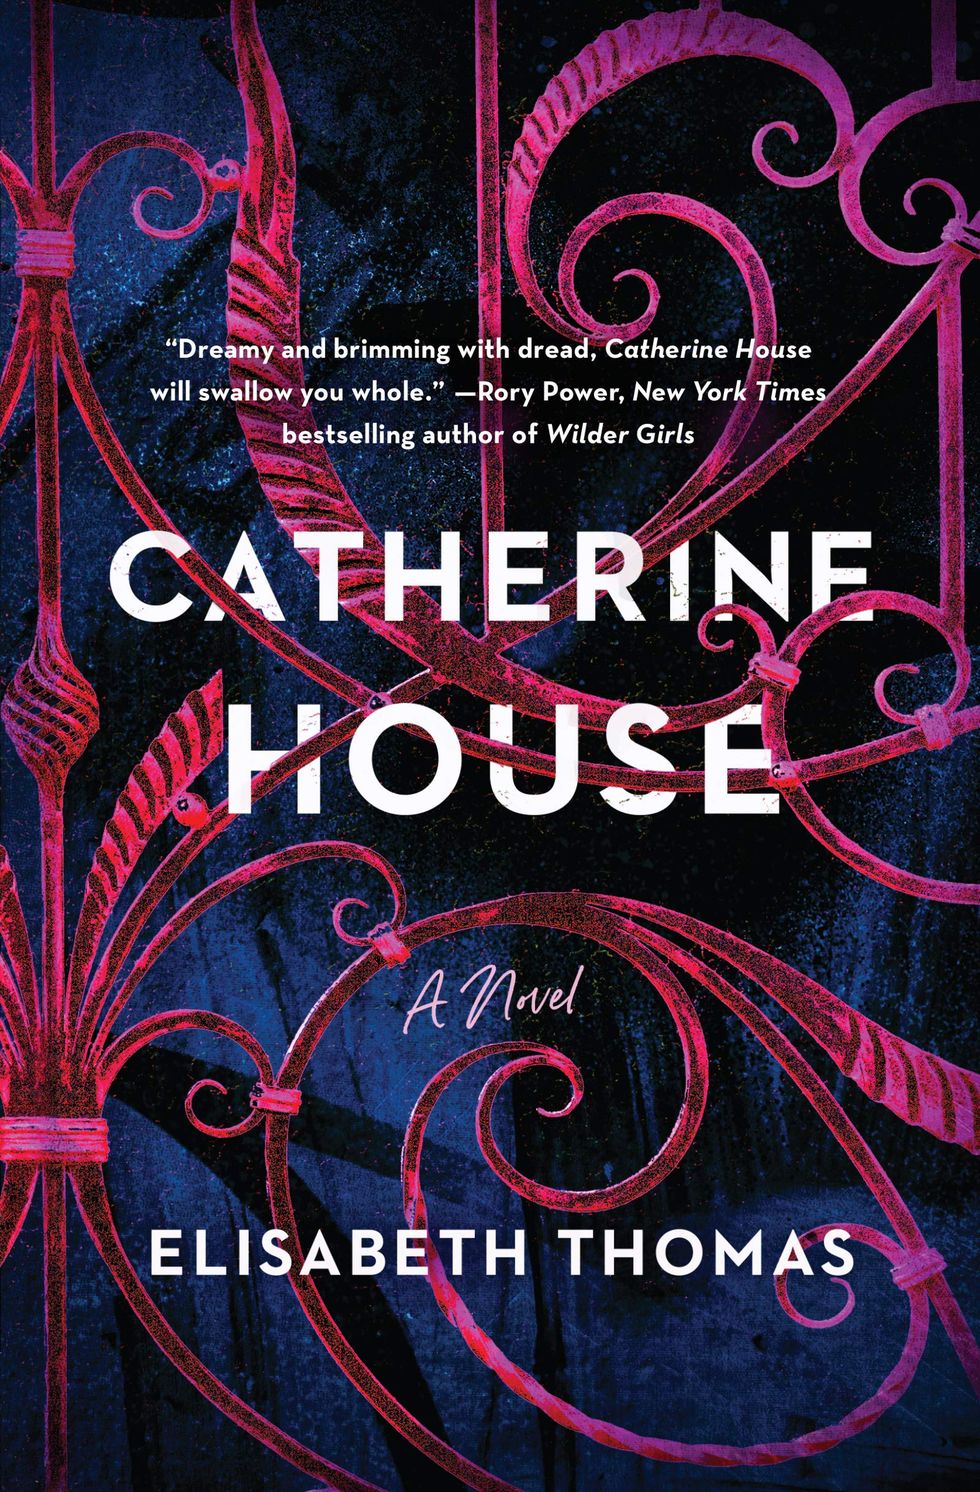 catherine house by elisabeth thomas cover featuring a dark navy background with a spiraling neon pink gate overlaid